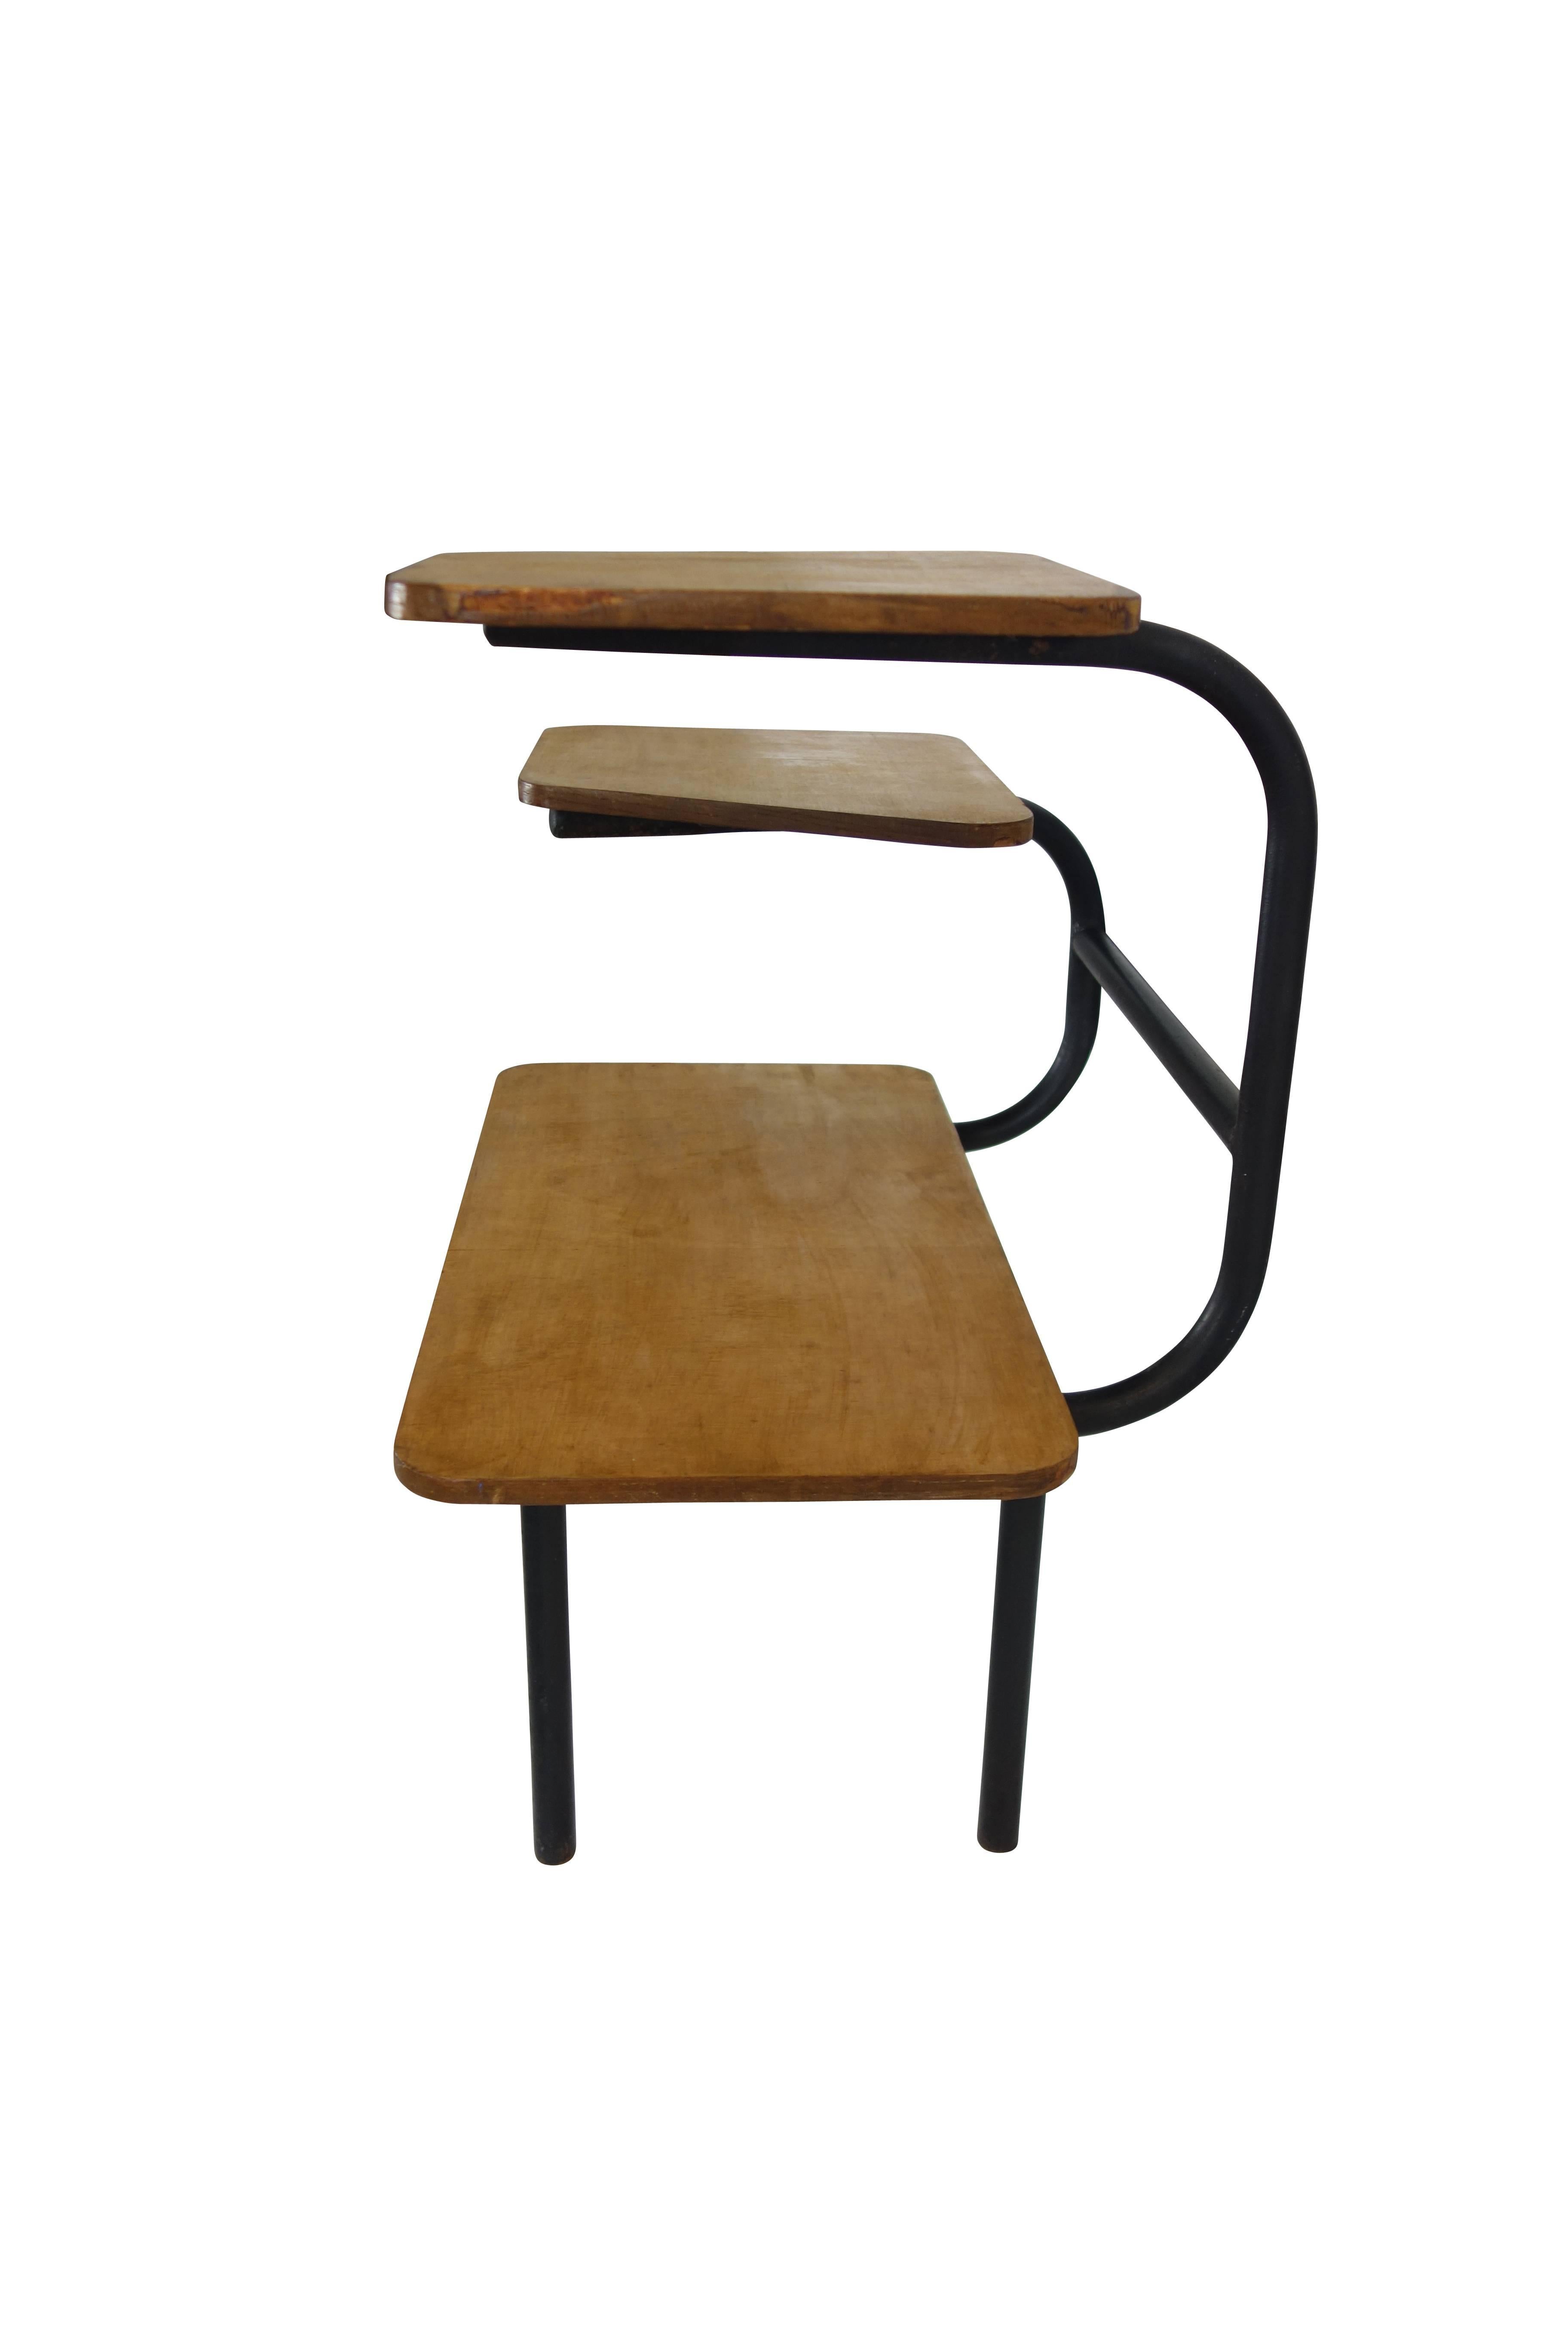 This is a unique Bauhaus style tubular steel and wood three tiered side table from France, circa 1940.